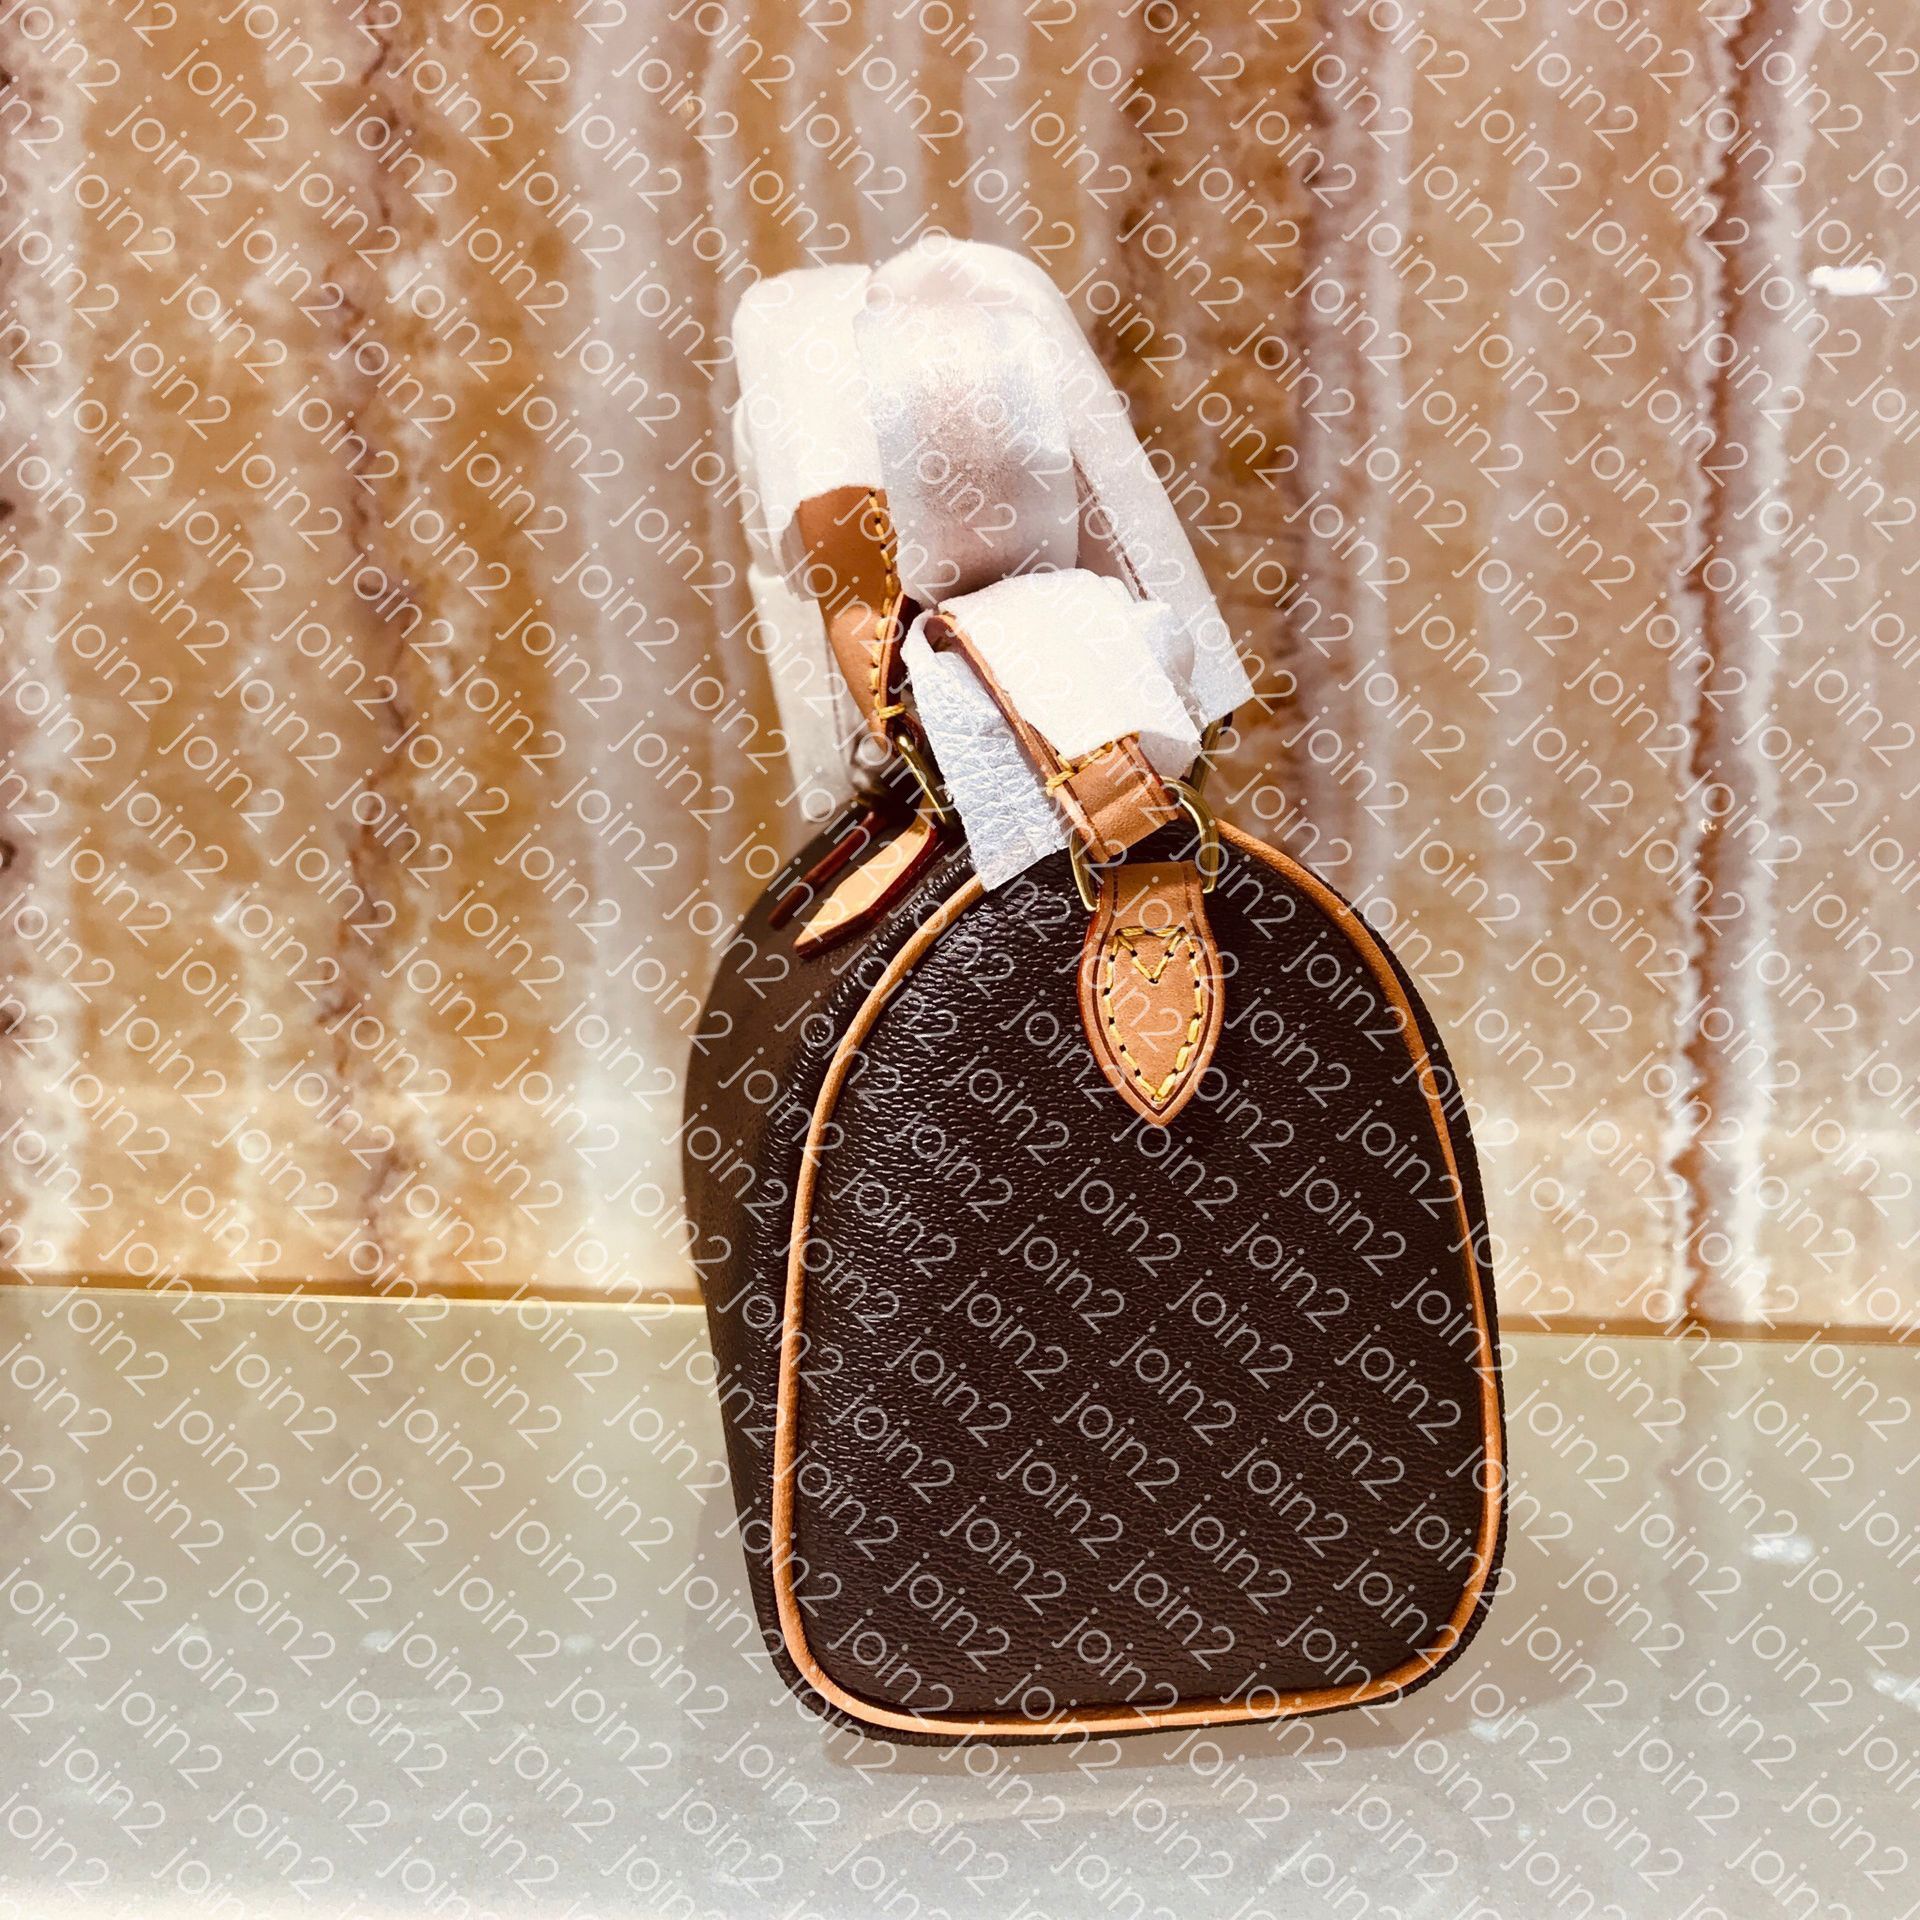 my first dhgate purchase 😍 #dhgate #dhg8 #louisvuitton #louisvuittonc